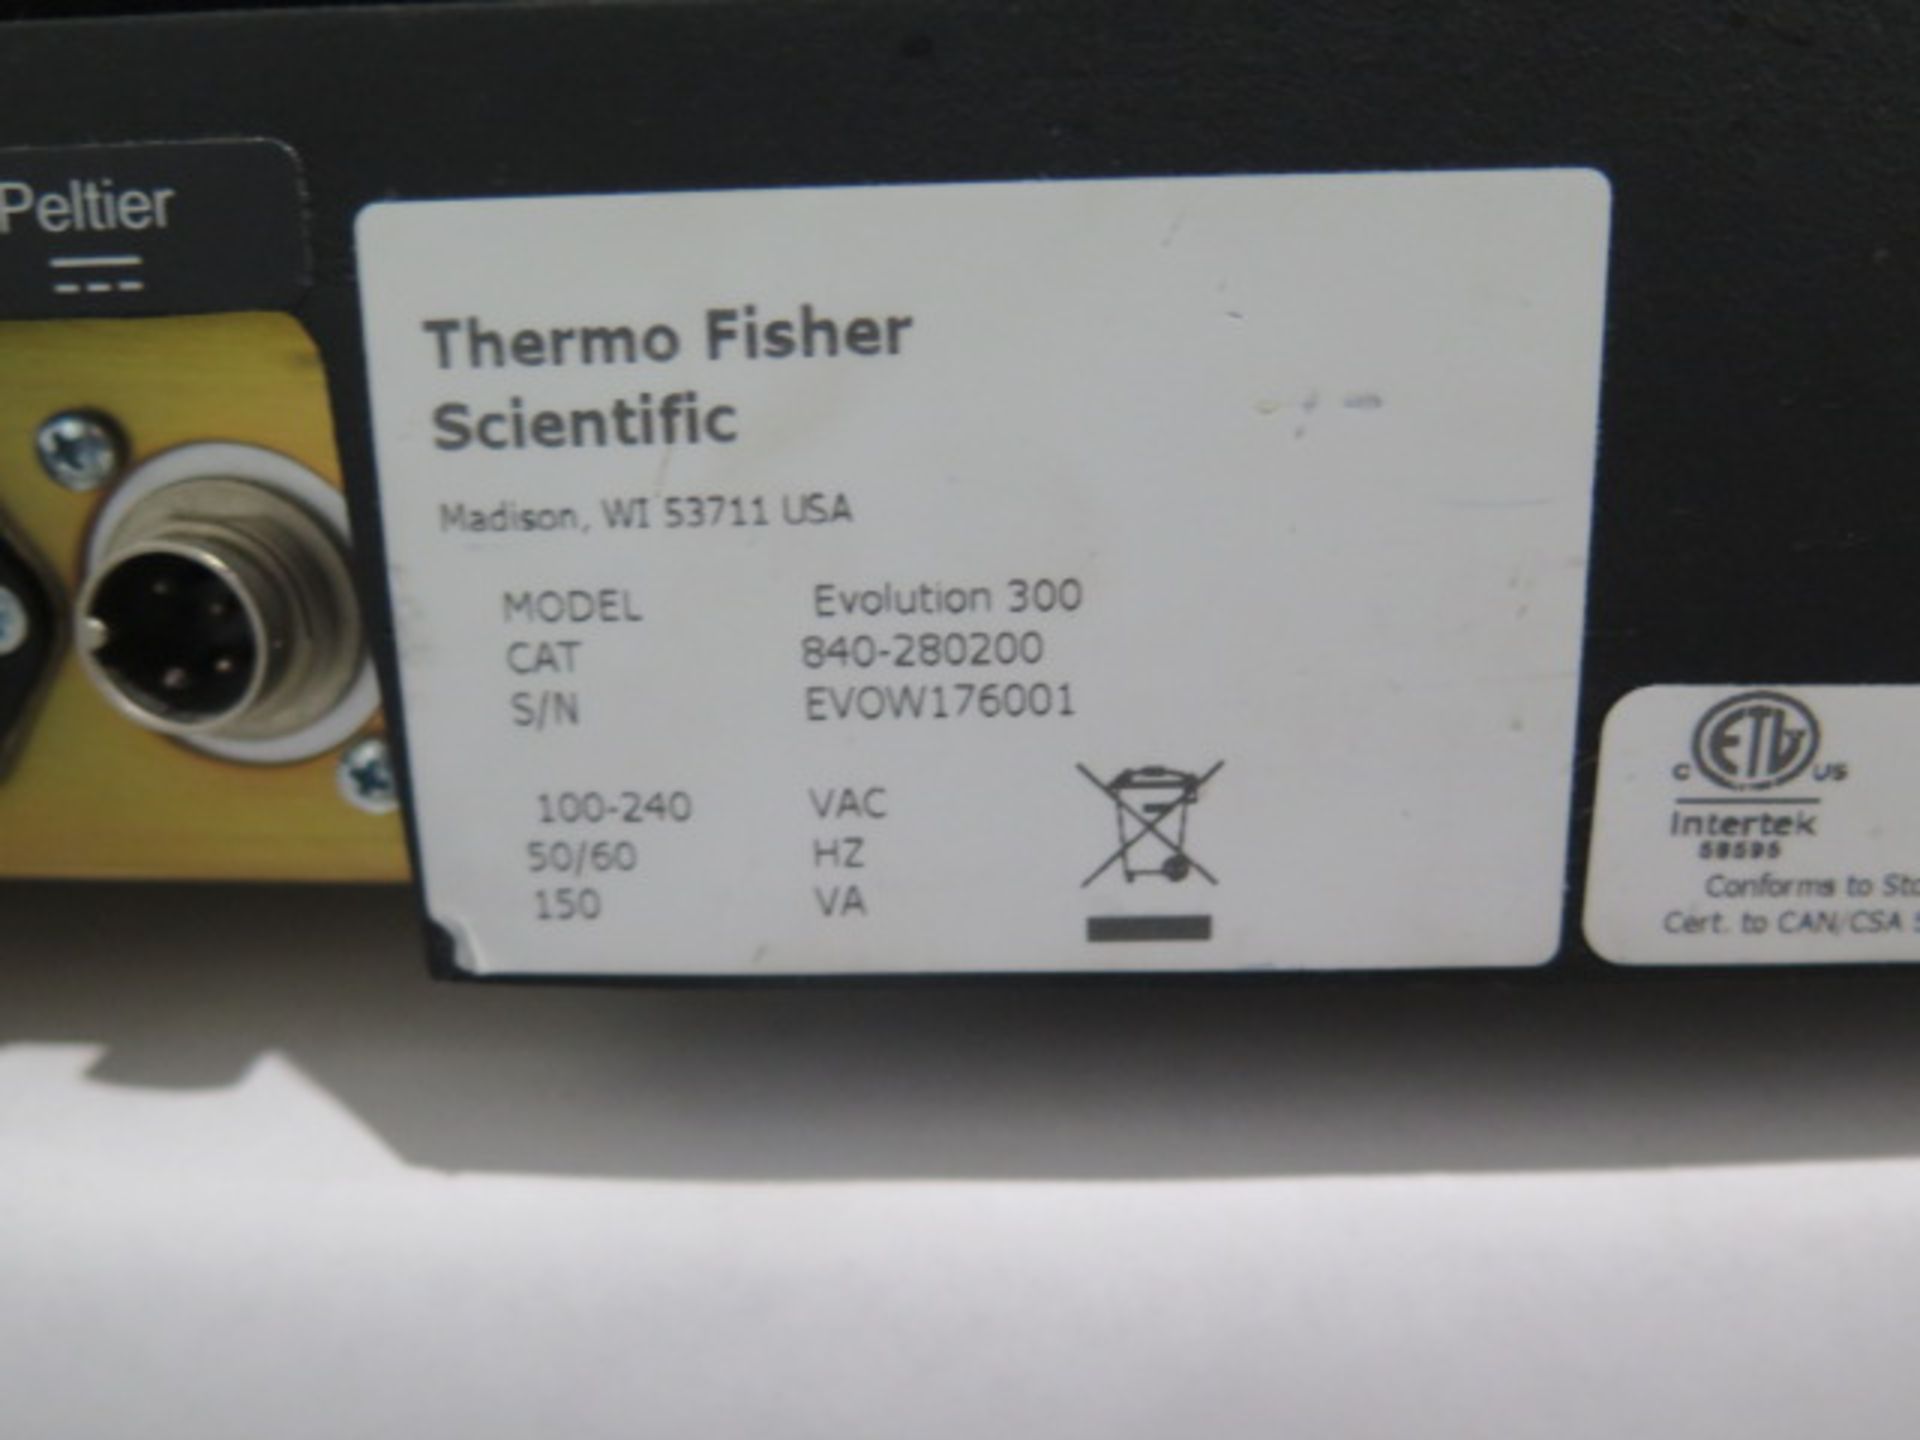 Thermo Scientific Evolution 300 UV-VIS Spectrophotometer s/n EVOW176001 (SOLD AS-IS - NO WARRANTY) - Image 10 of 10